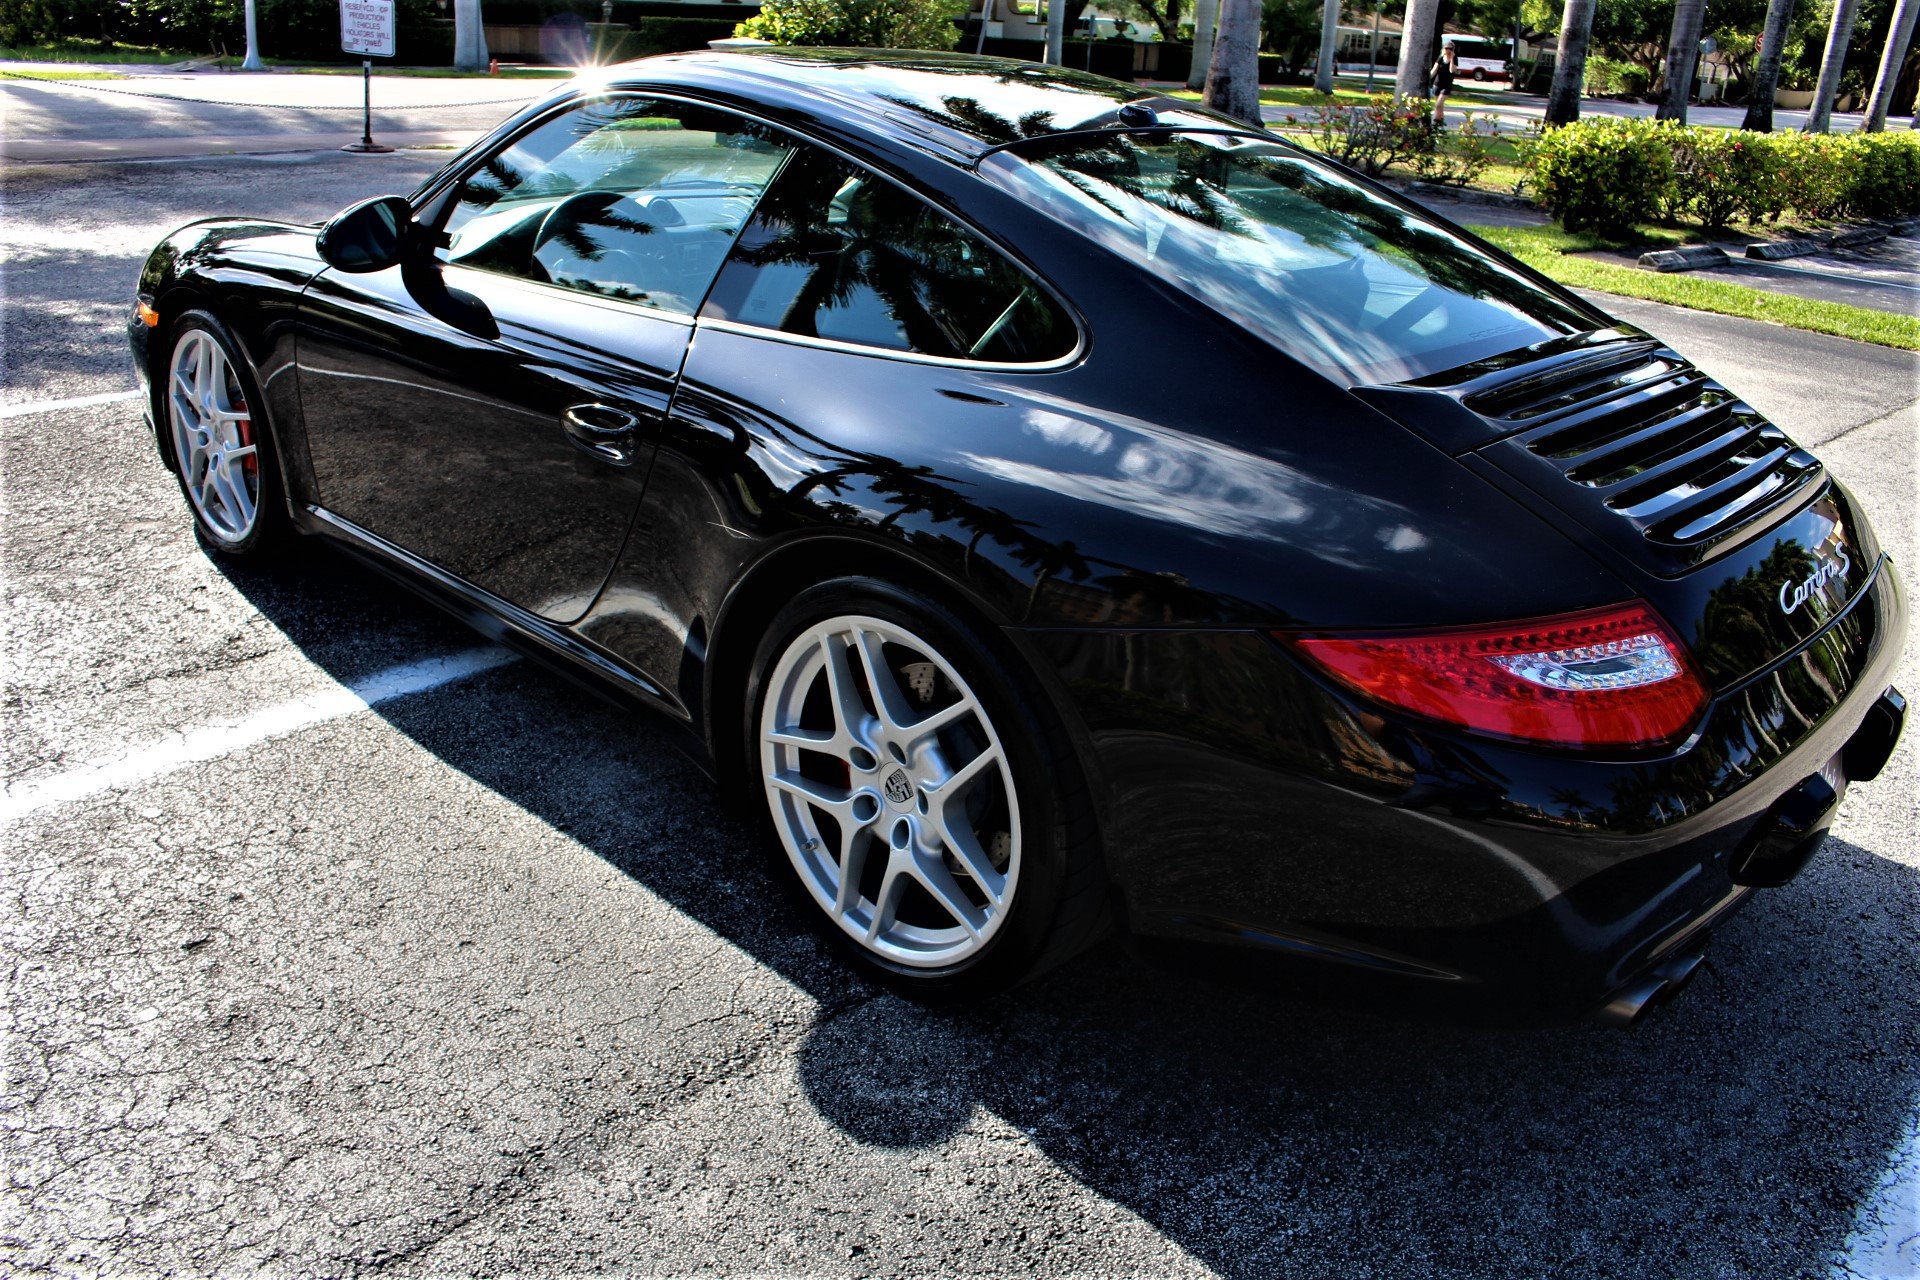 Used 2010 Porsche 911 Carrera S for sale Sold at The Gables Sports Cars in Miami FL 33146 2